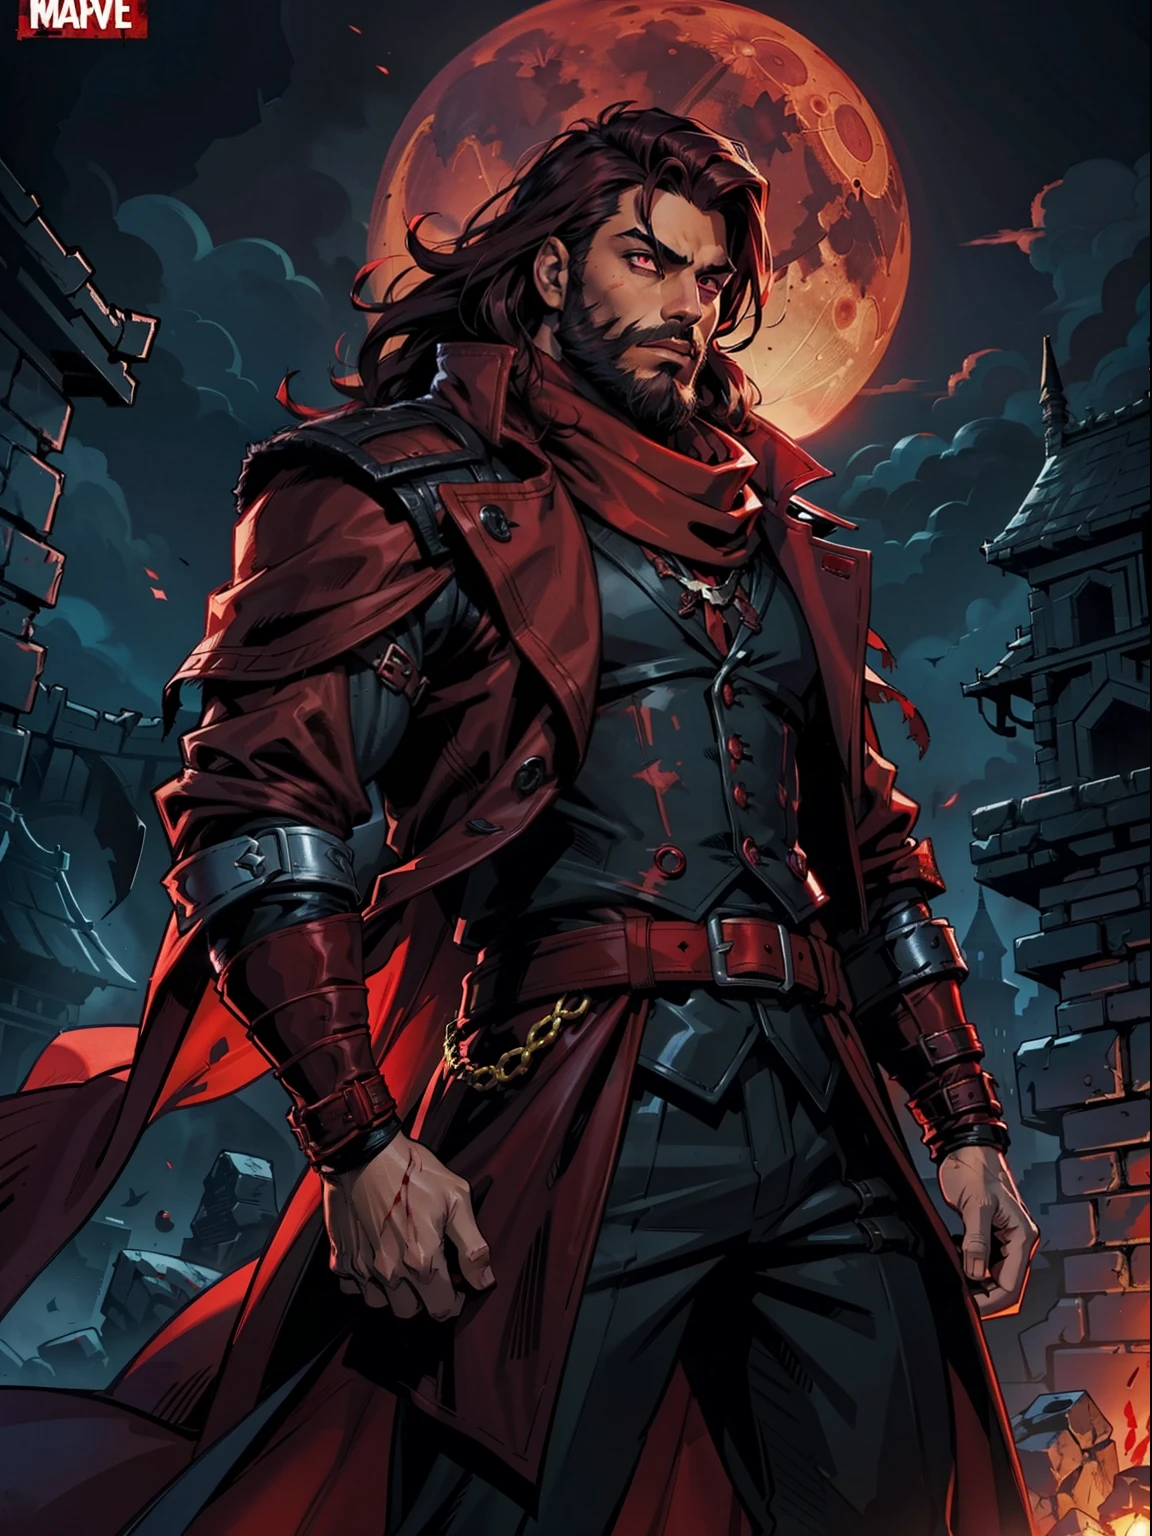 Dark night blood moon background, Darkest dungeon style, Sadurang from Marvel, hunk, wild mane, defined face, detailed eyes, short beard, glowing red eyes, dark hair, wearing classy trench coat and red scarf